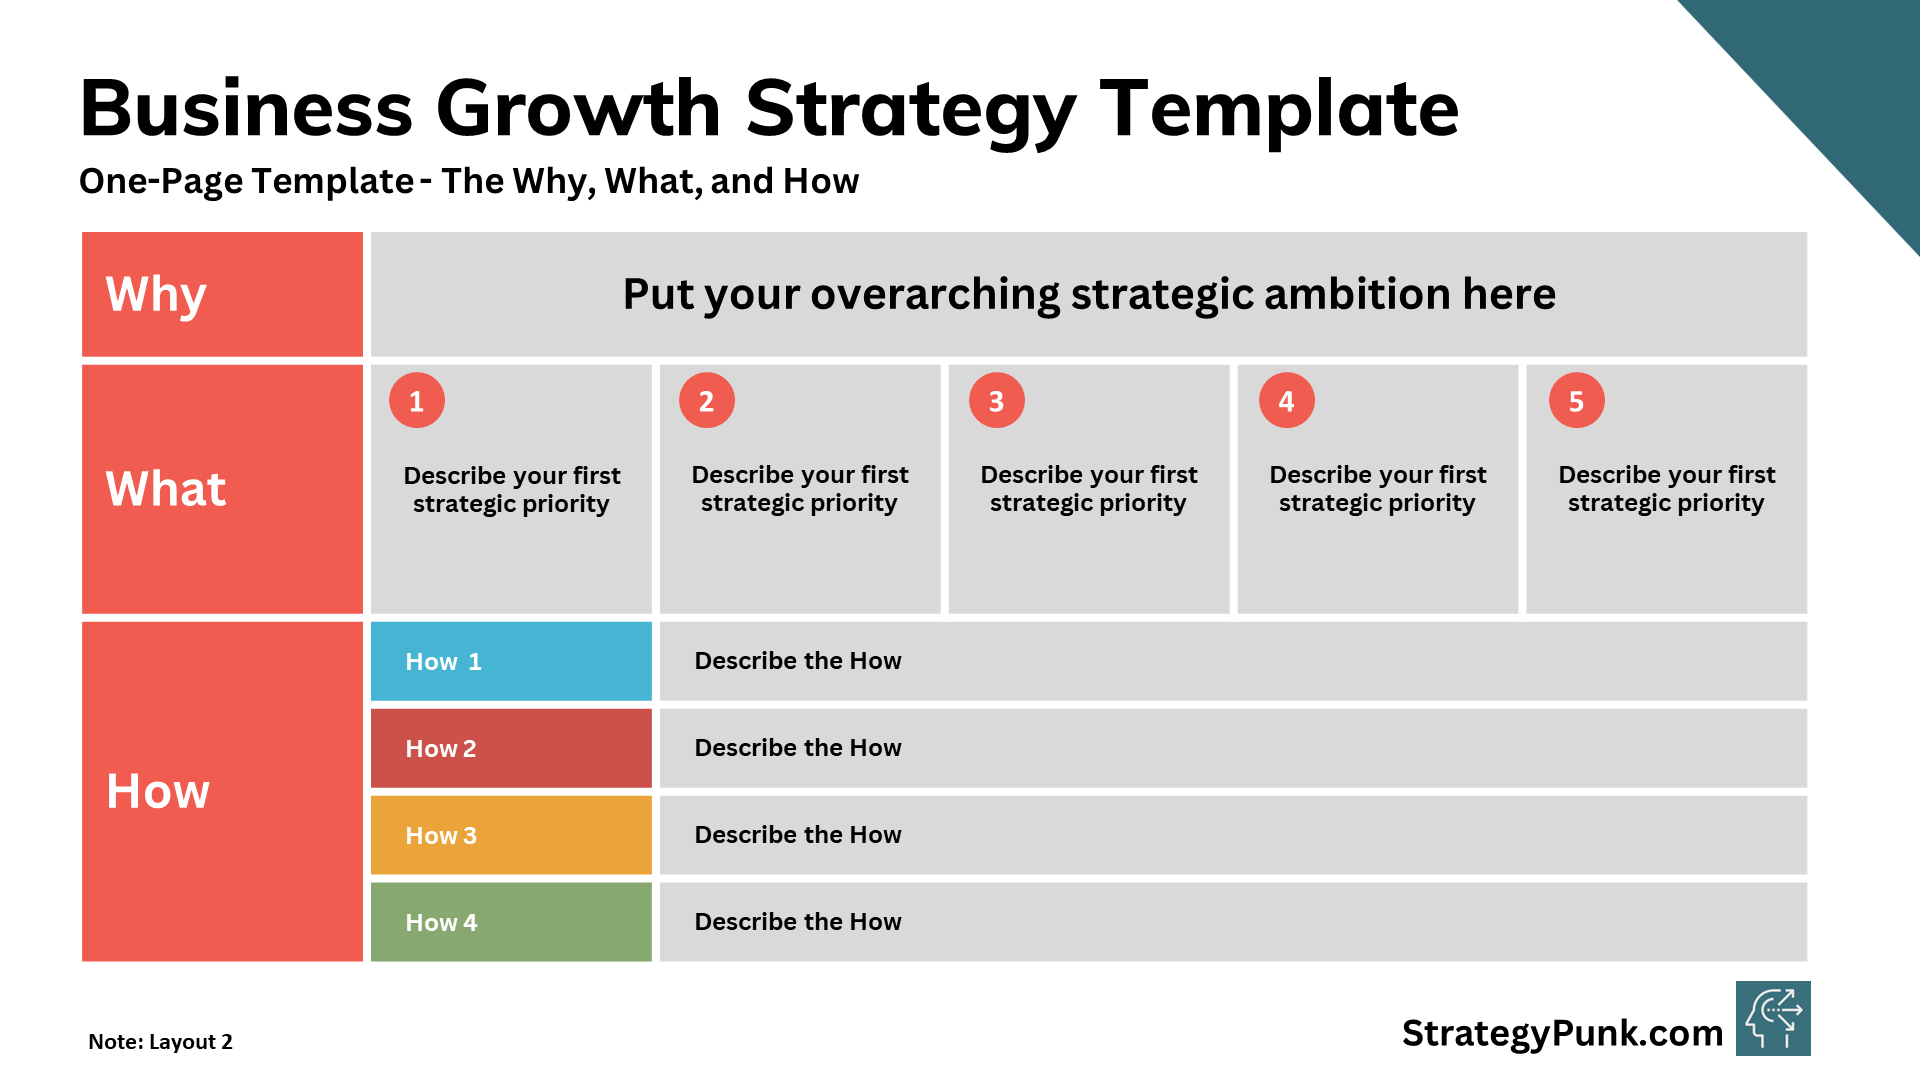 Business Growth Strategy PPT Template - The Why, What, and How